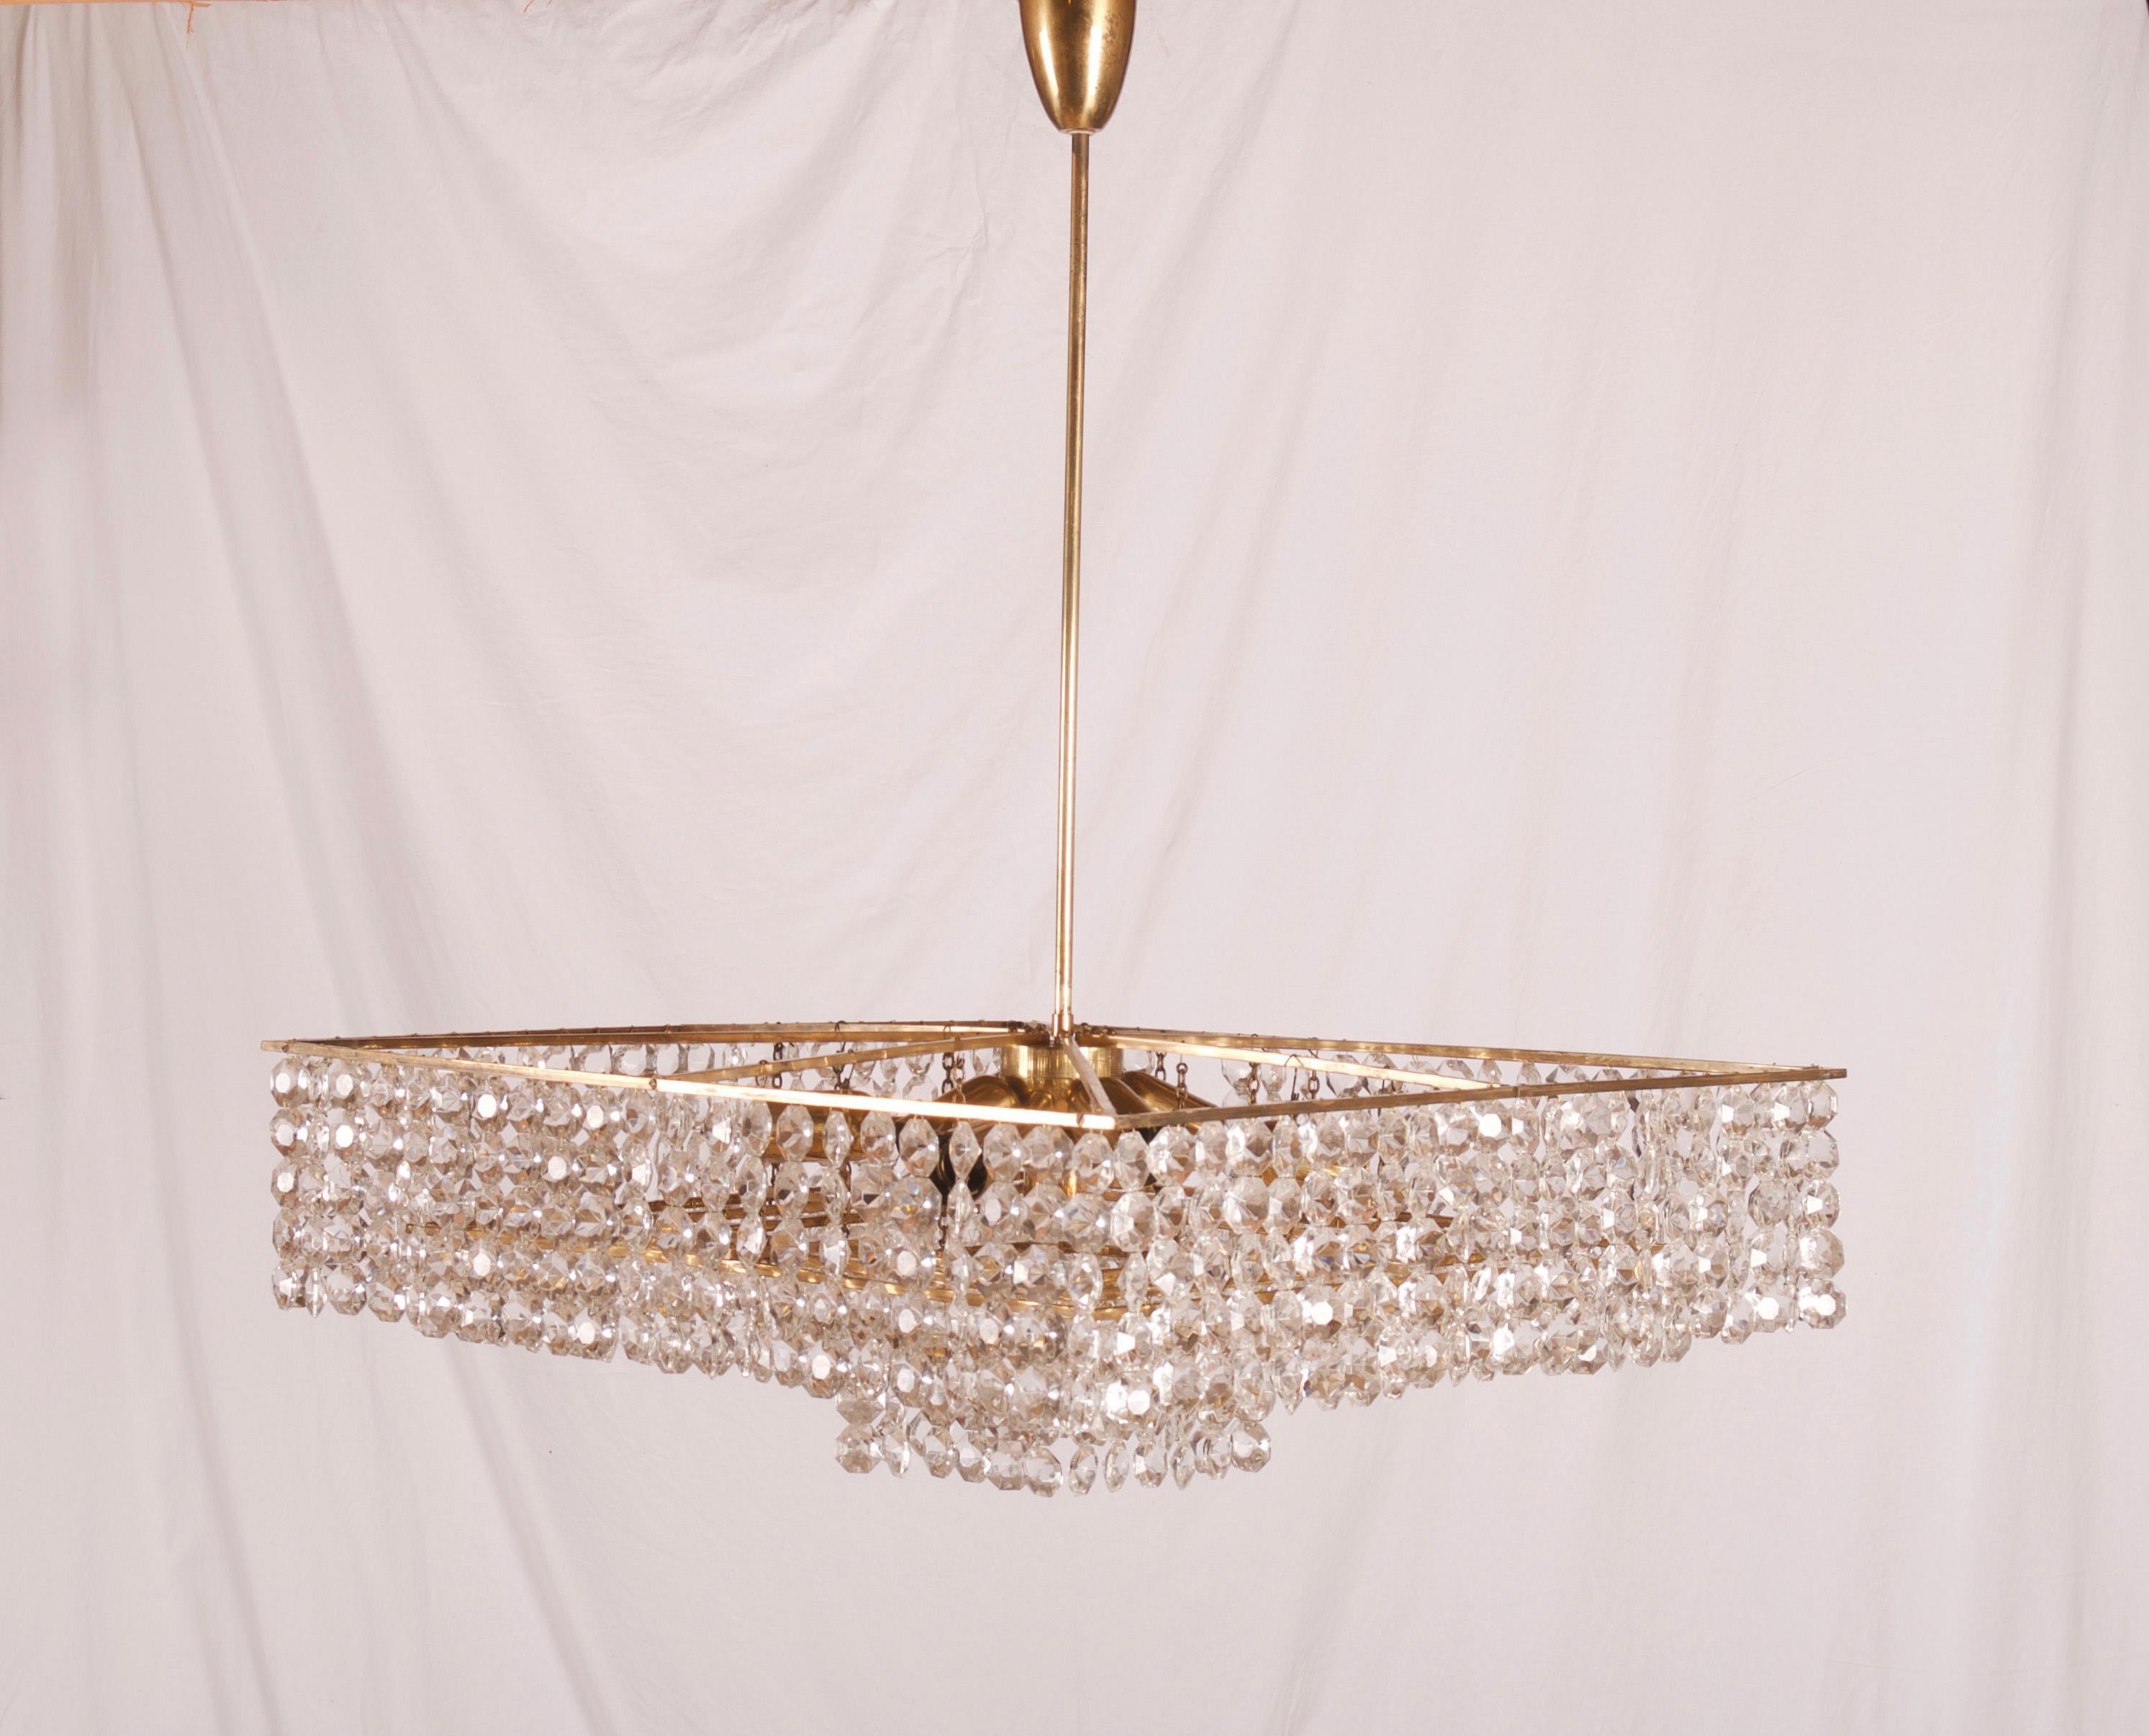 Midcentury Square Cut Crystal Chandelier In Good Condition For Sale In Vienna, AT